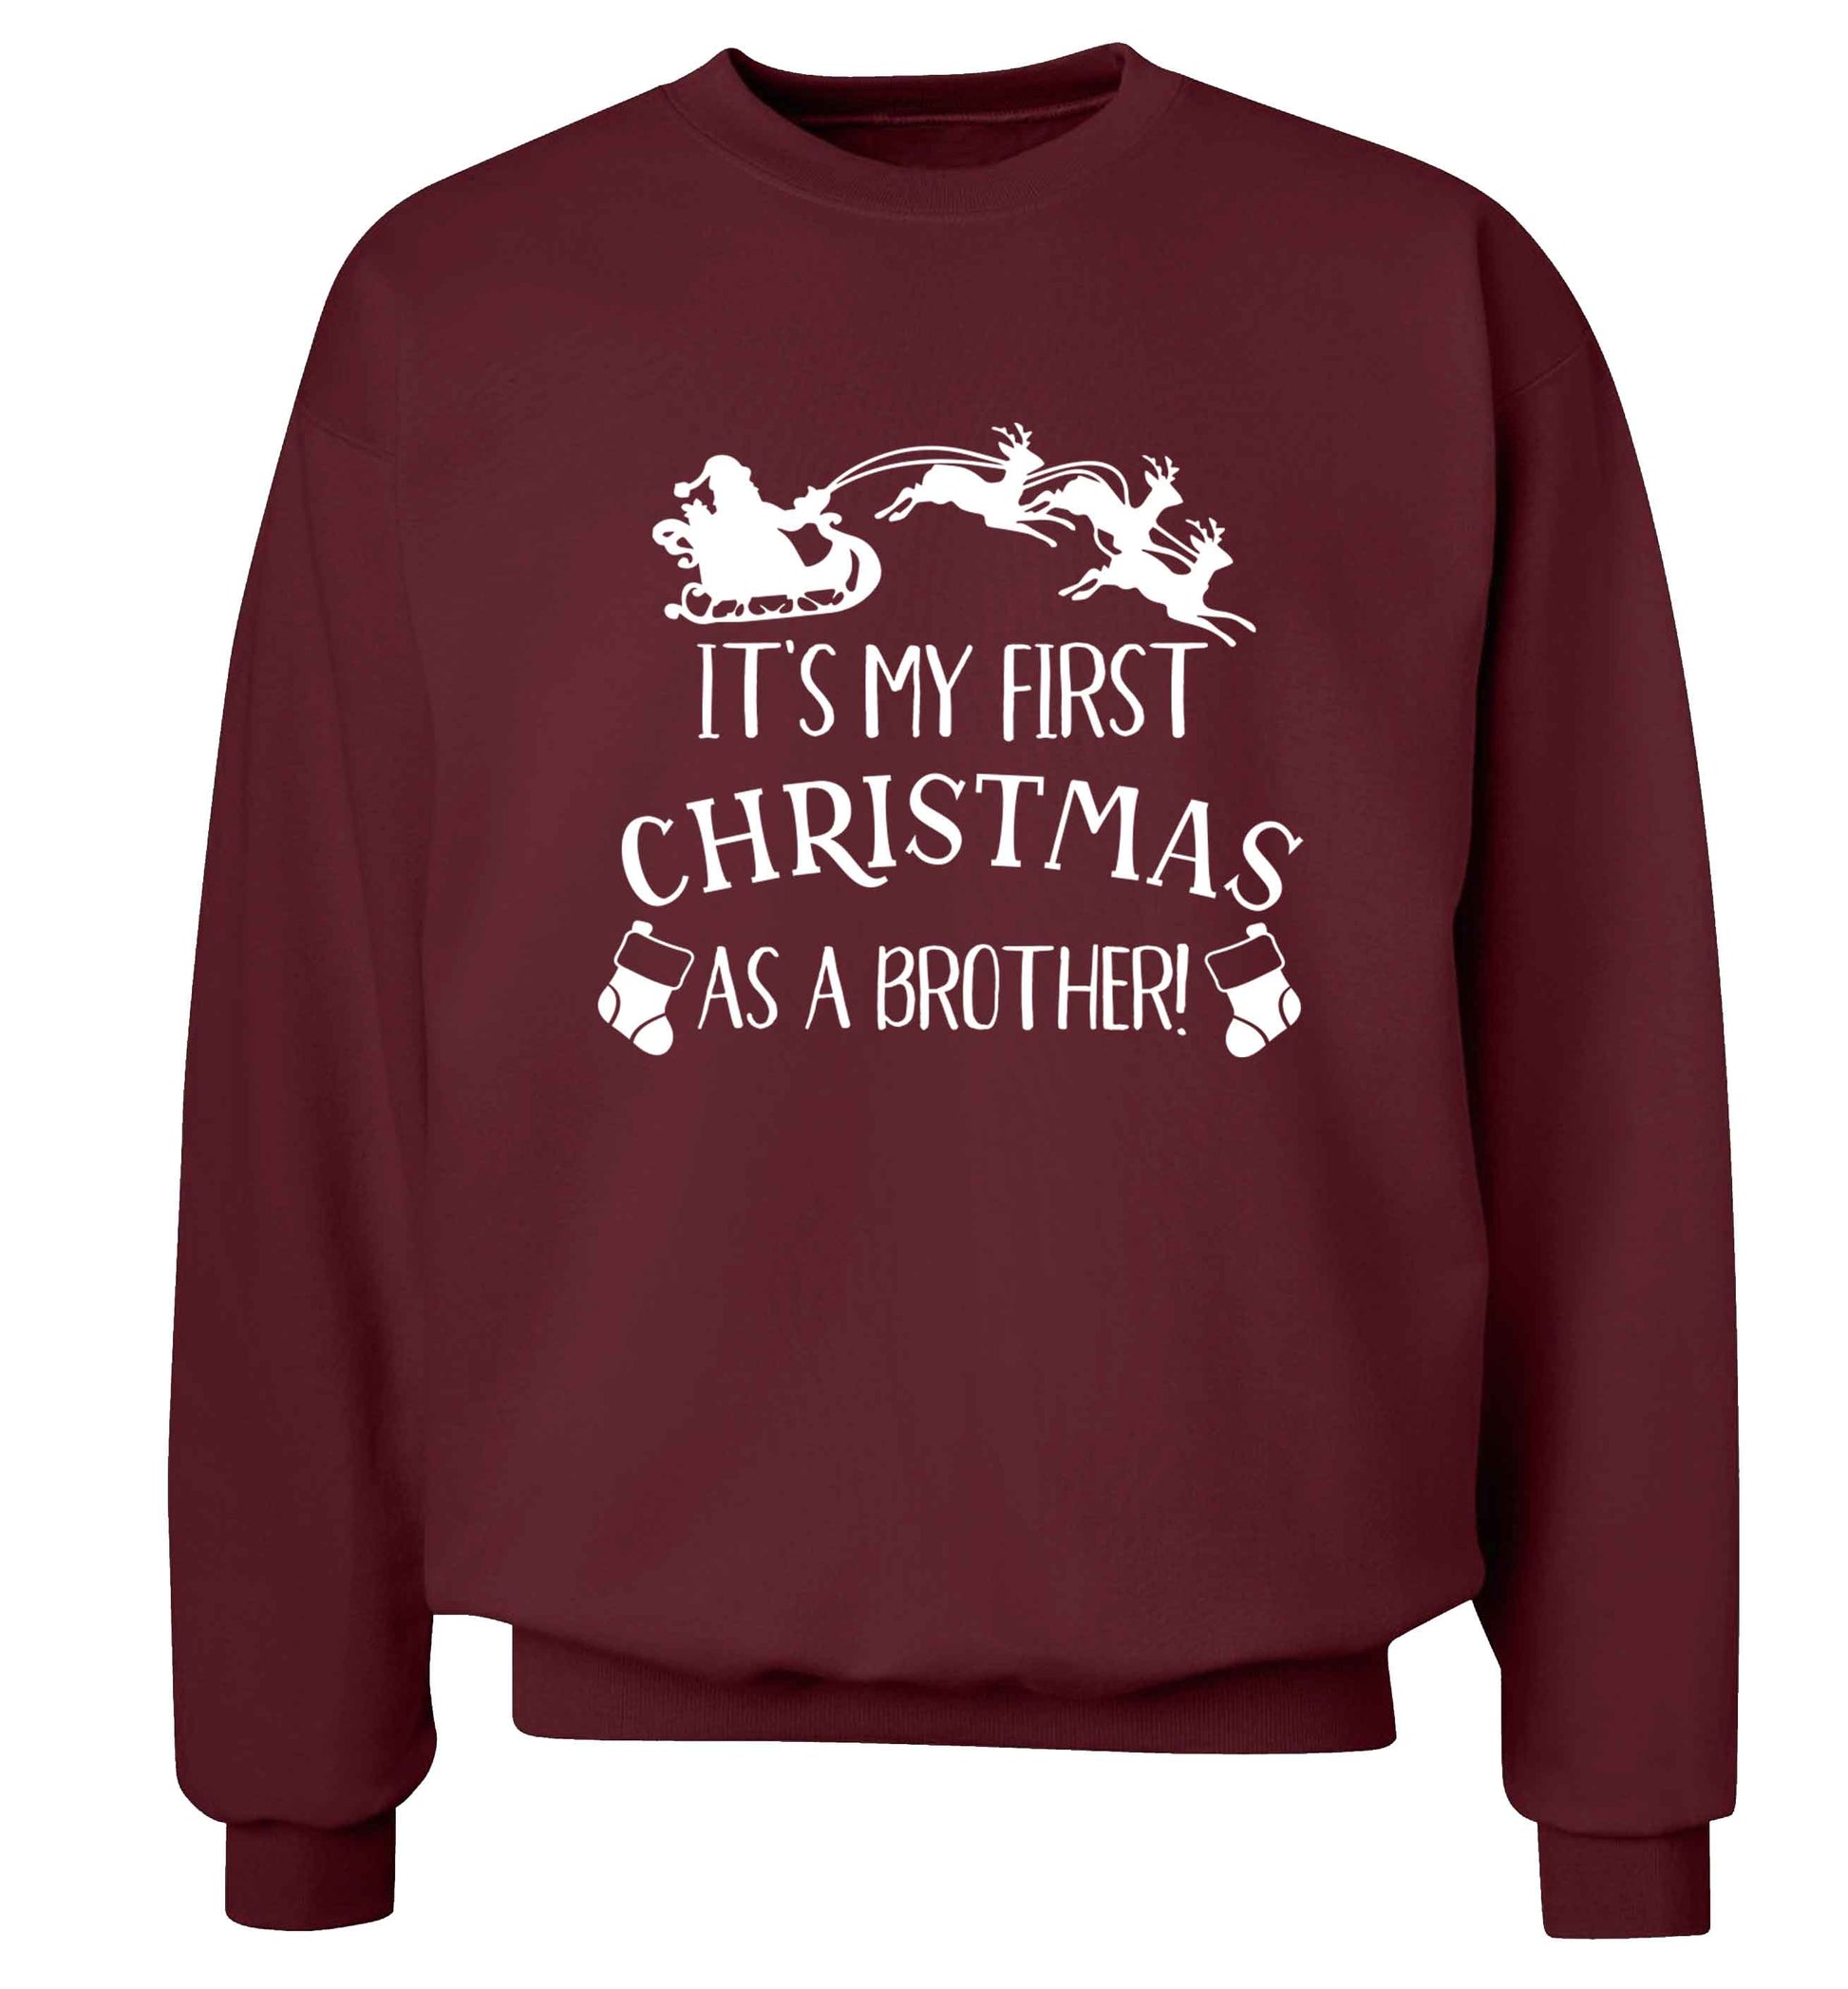 It's my first Christmas as a brother! Adult's unisex maroon Sweater 2XL